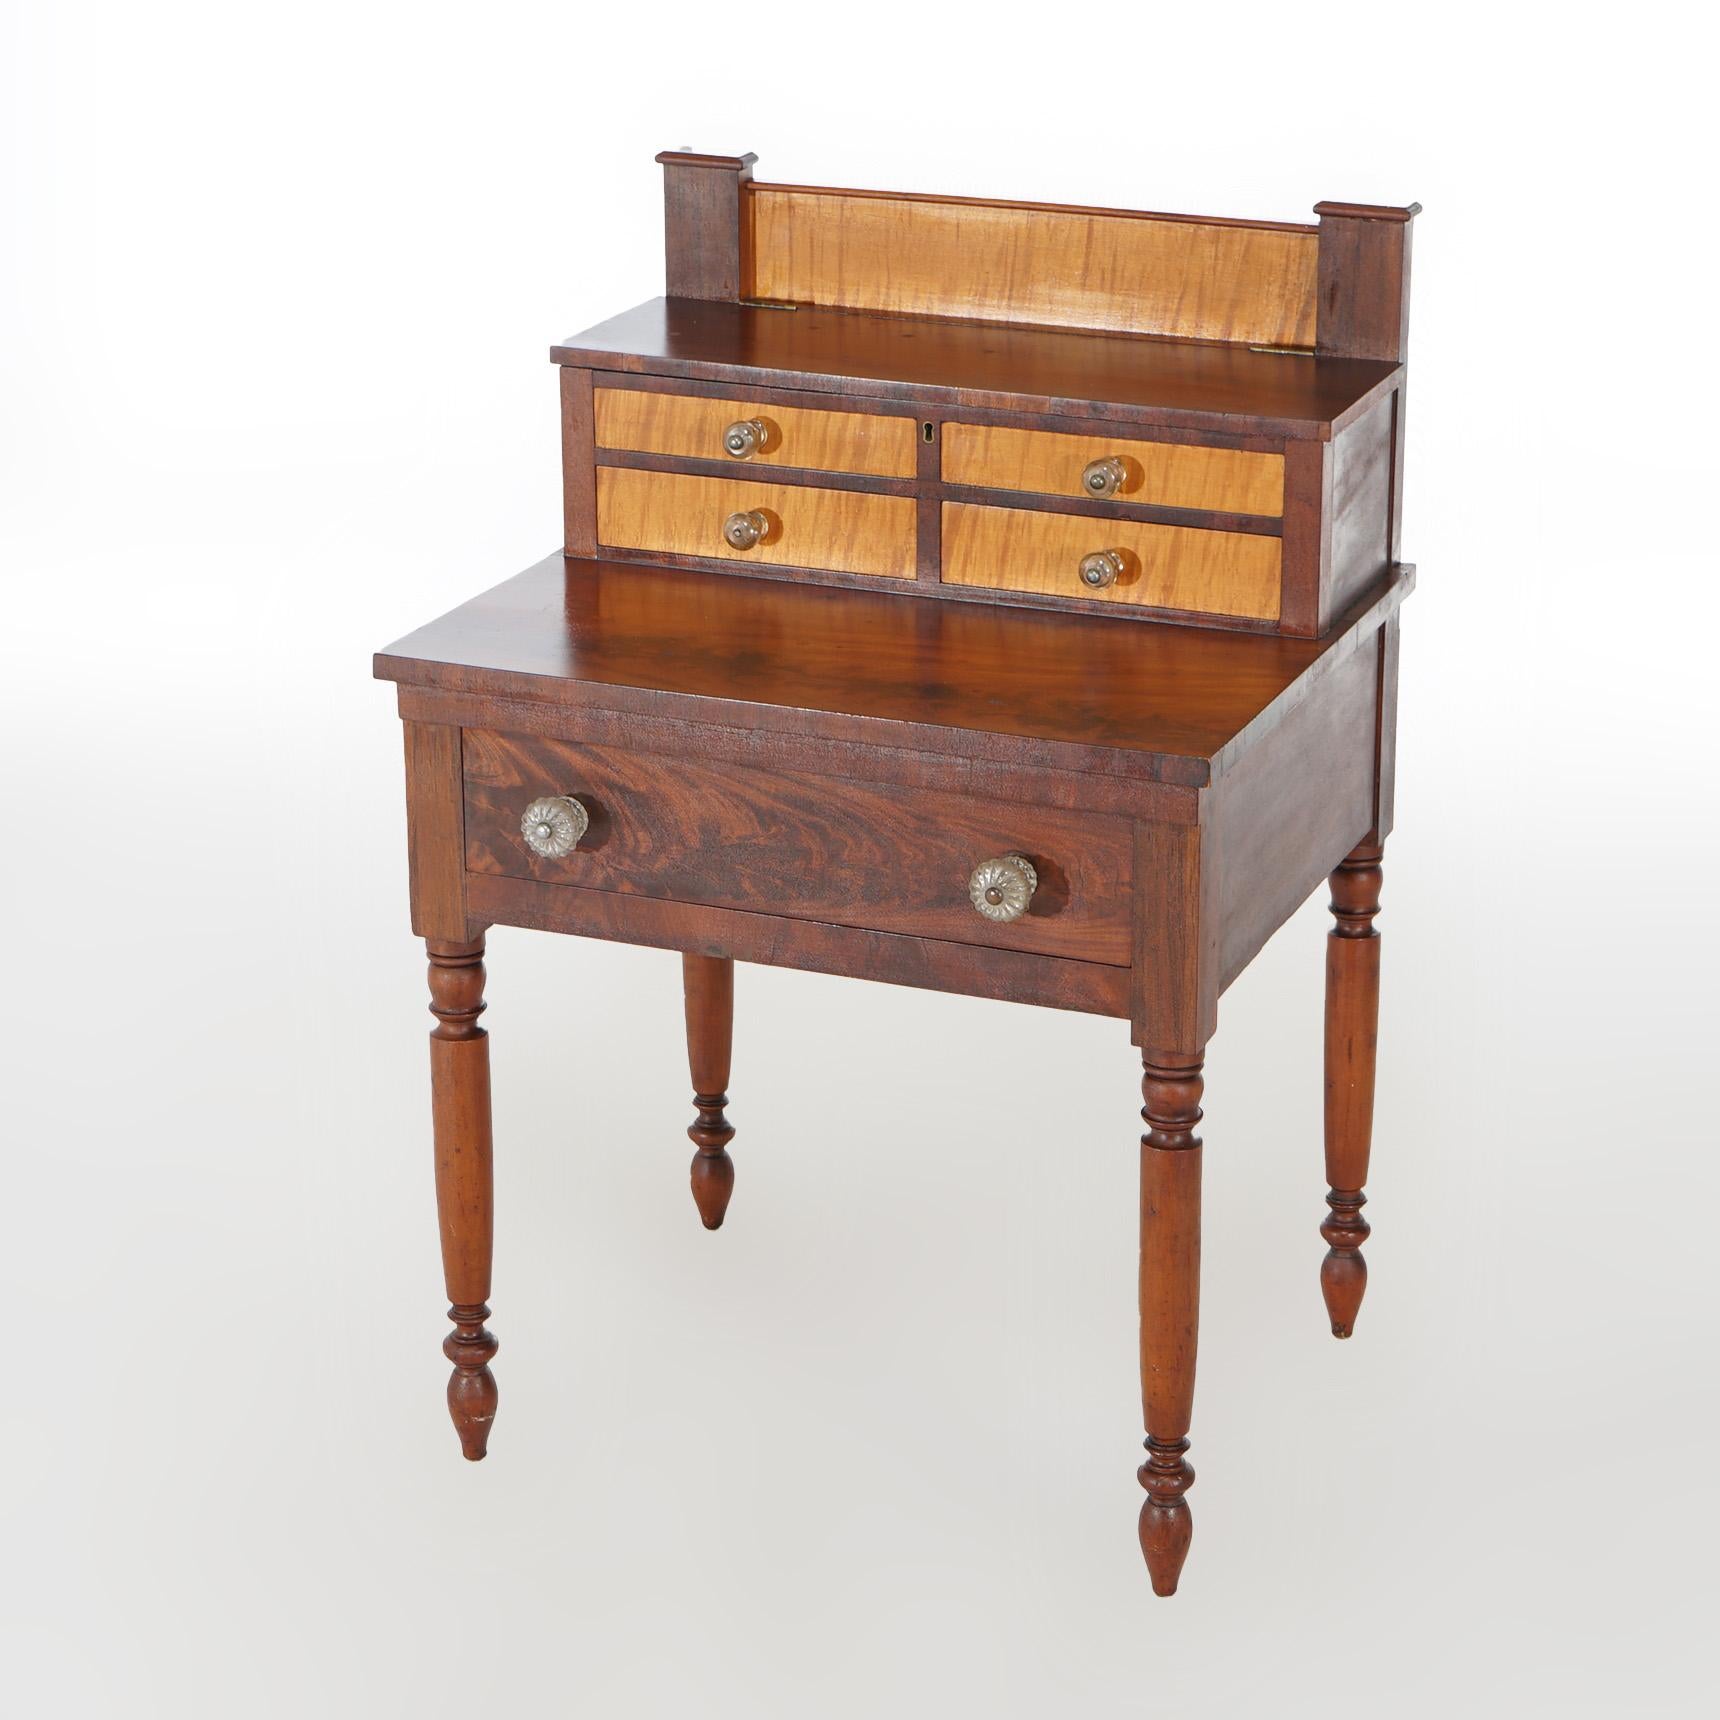 An antique Sheraton sewing stand offers flame mahogany and tiger maple construction with upper lift top compartments having faux drawers and lower small drawers over case with single drawer and raised on turned legs; en verso Gorsch label;